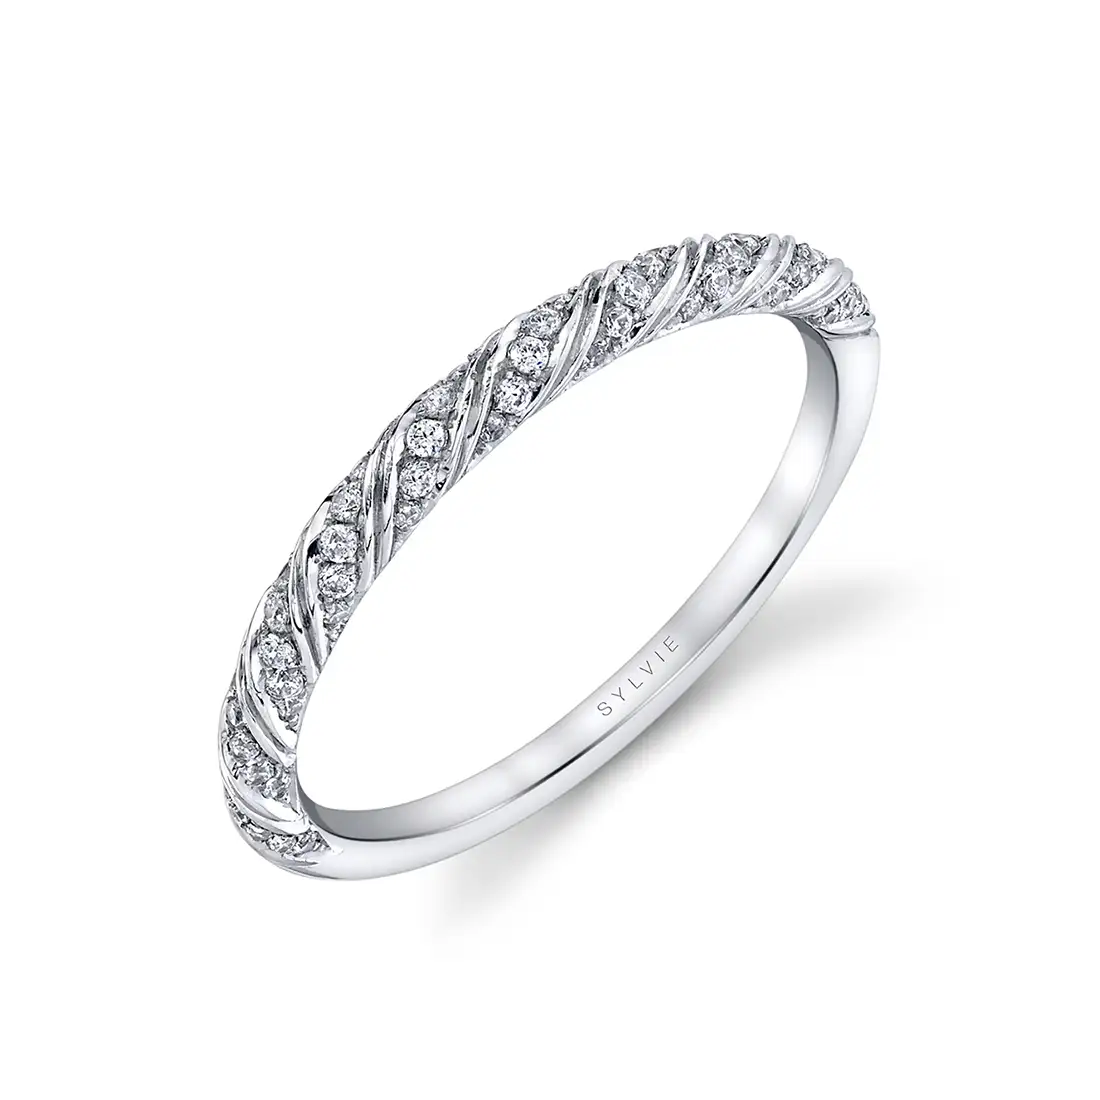 Unique Wedding Band in White Gold